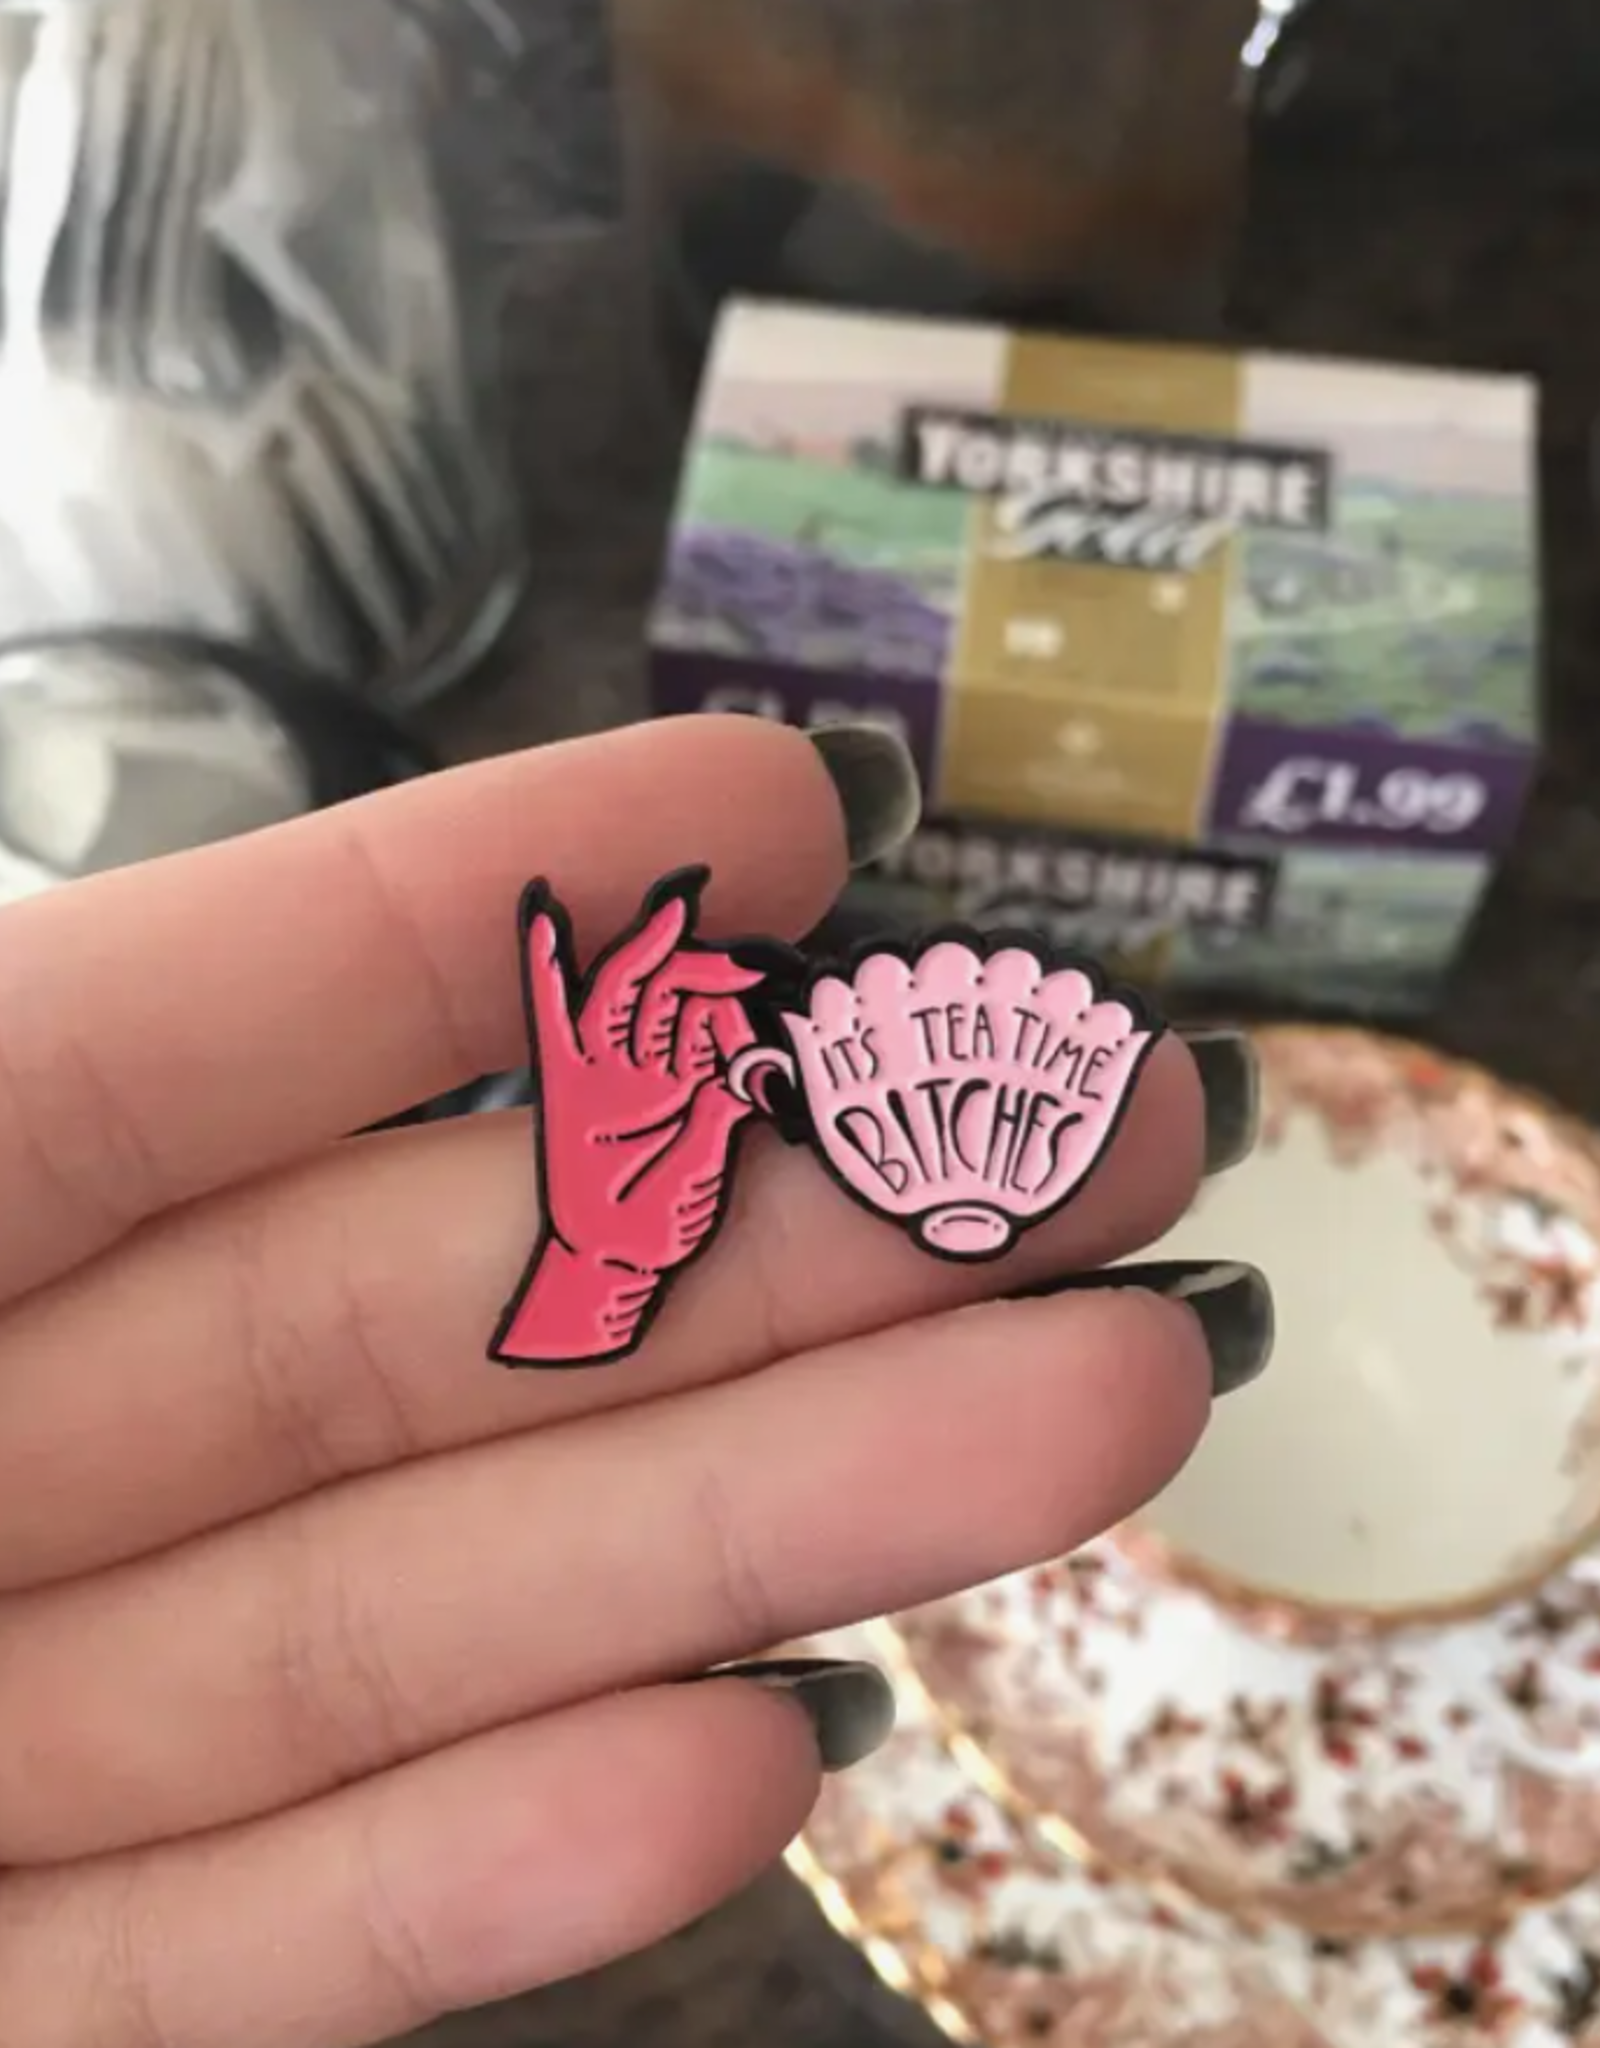 Ectogasm It's Teatime, Bitches: Funny Teacup Enamel Pin